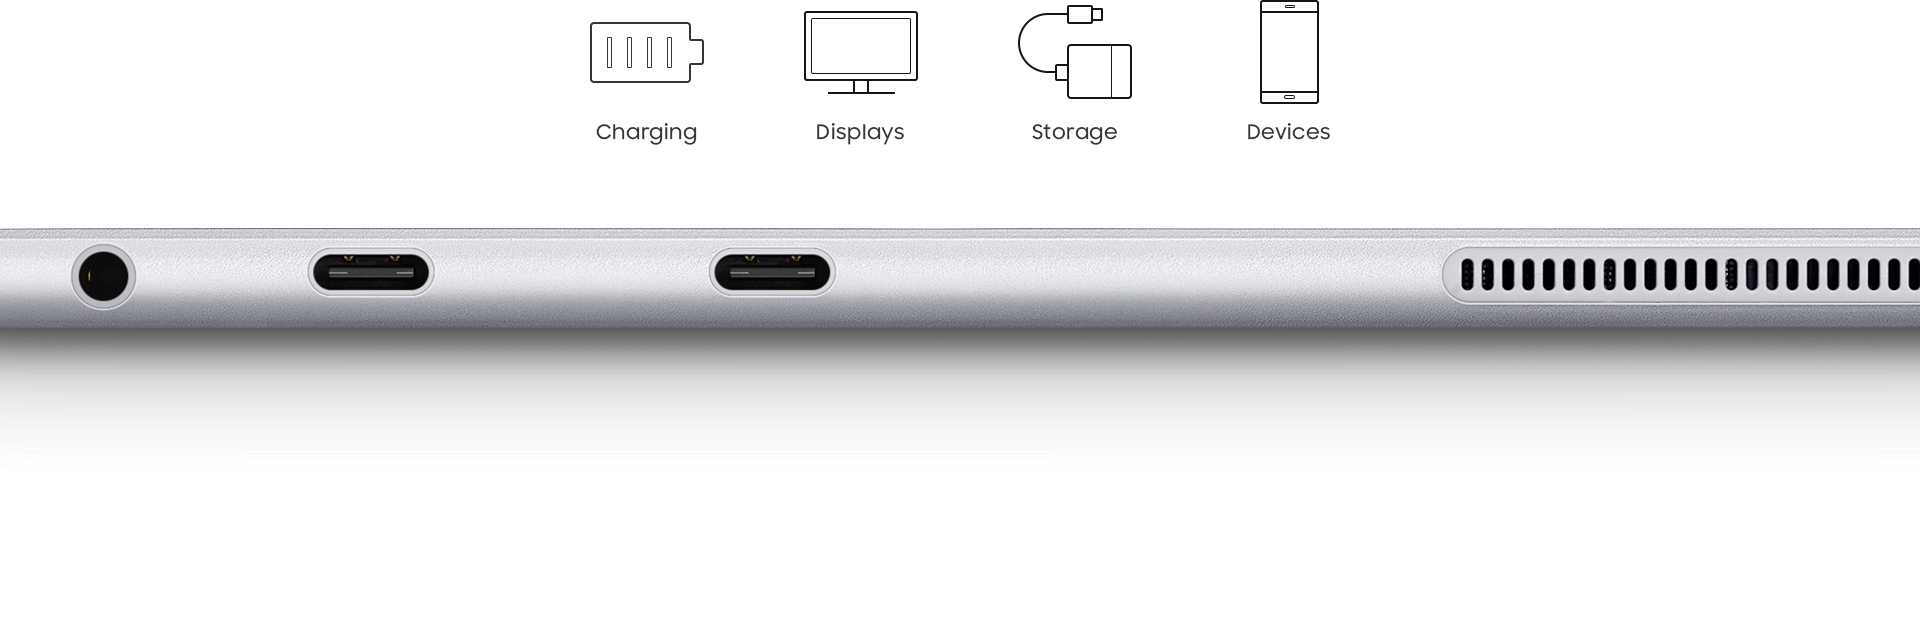 An image showing the side of a Galaxy Book 10.6 device, displaying its earphone and USB-C ports. At the bottom of the image, USB-C is written in large text. On the top are charging, displays, storage and devices icons.